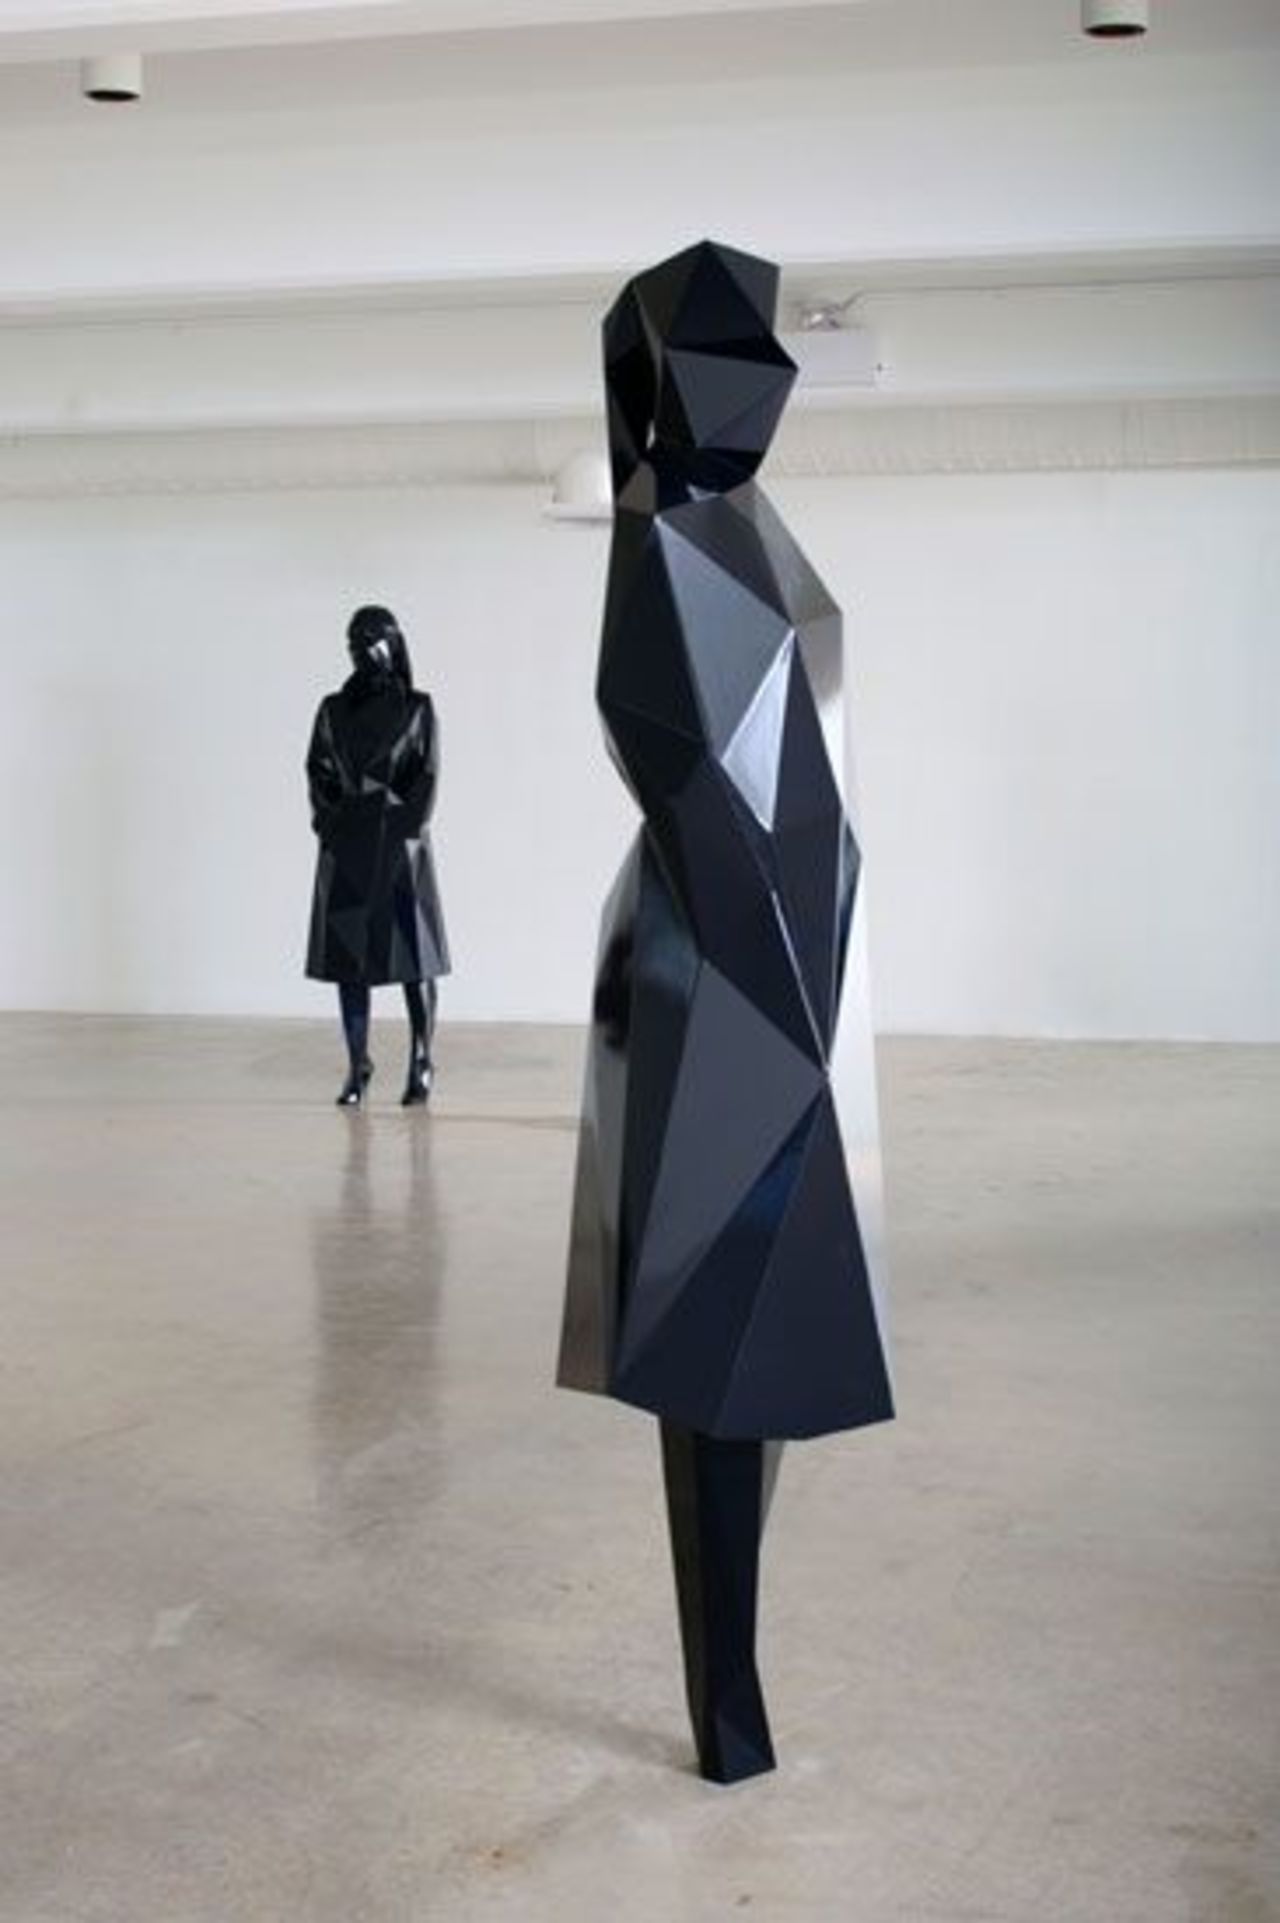 Geometric Sculpture with faceted structure by Xavier Veilhan #art #sculpture #geometry http://t.co/9rsEYOuPQE